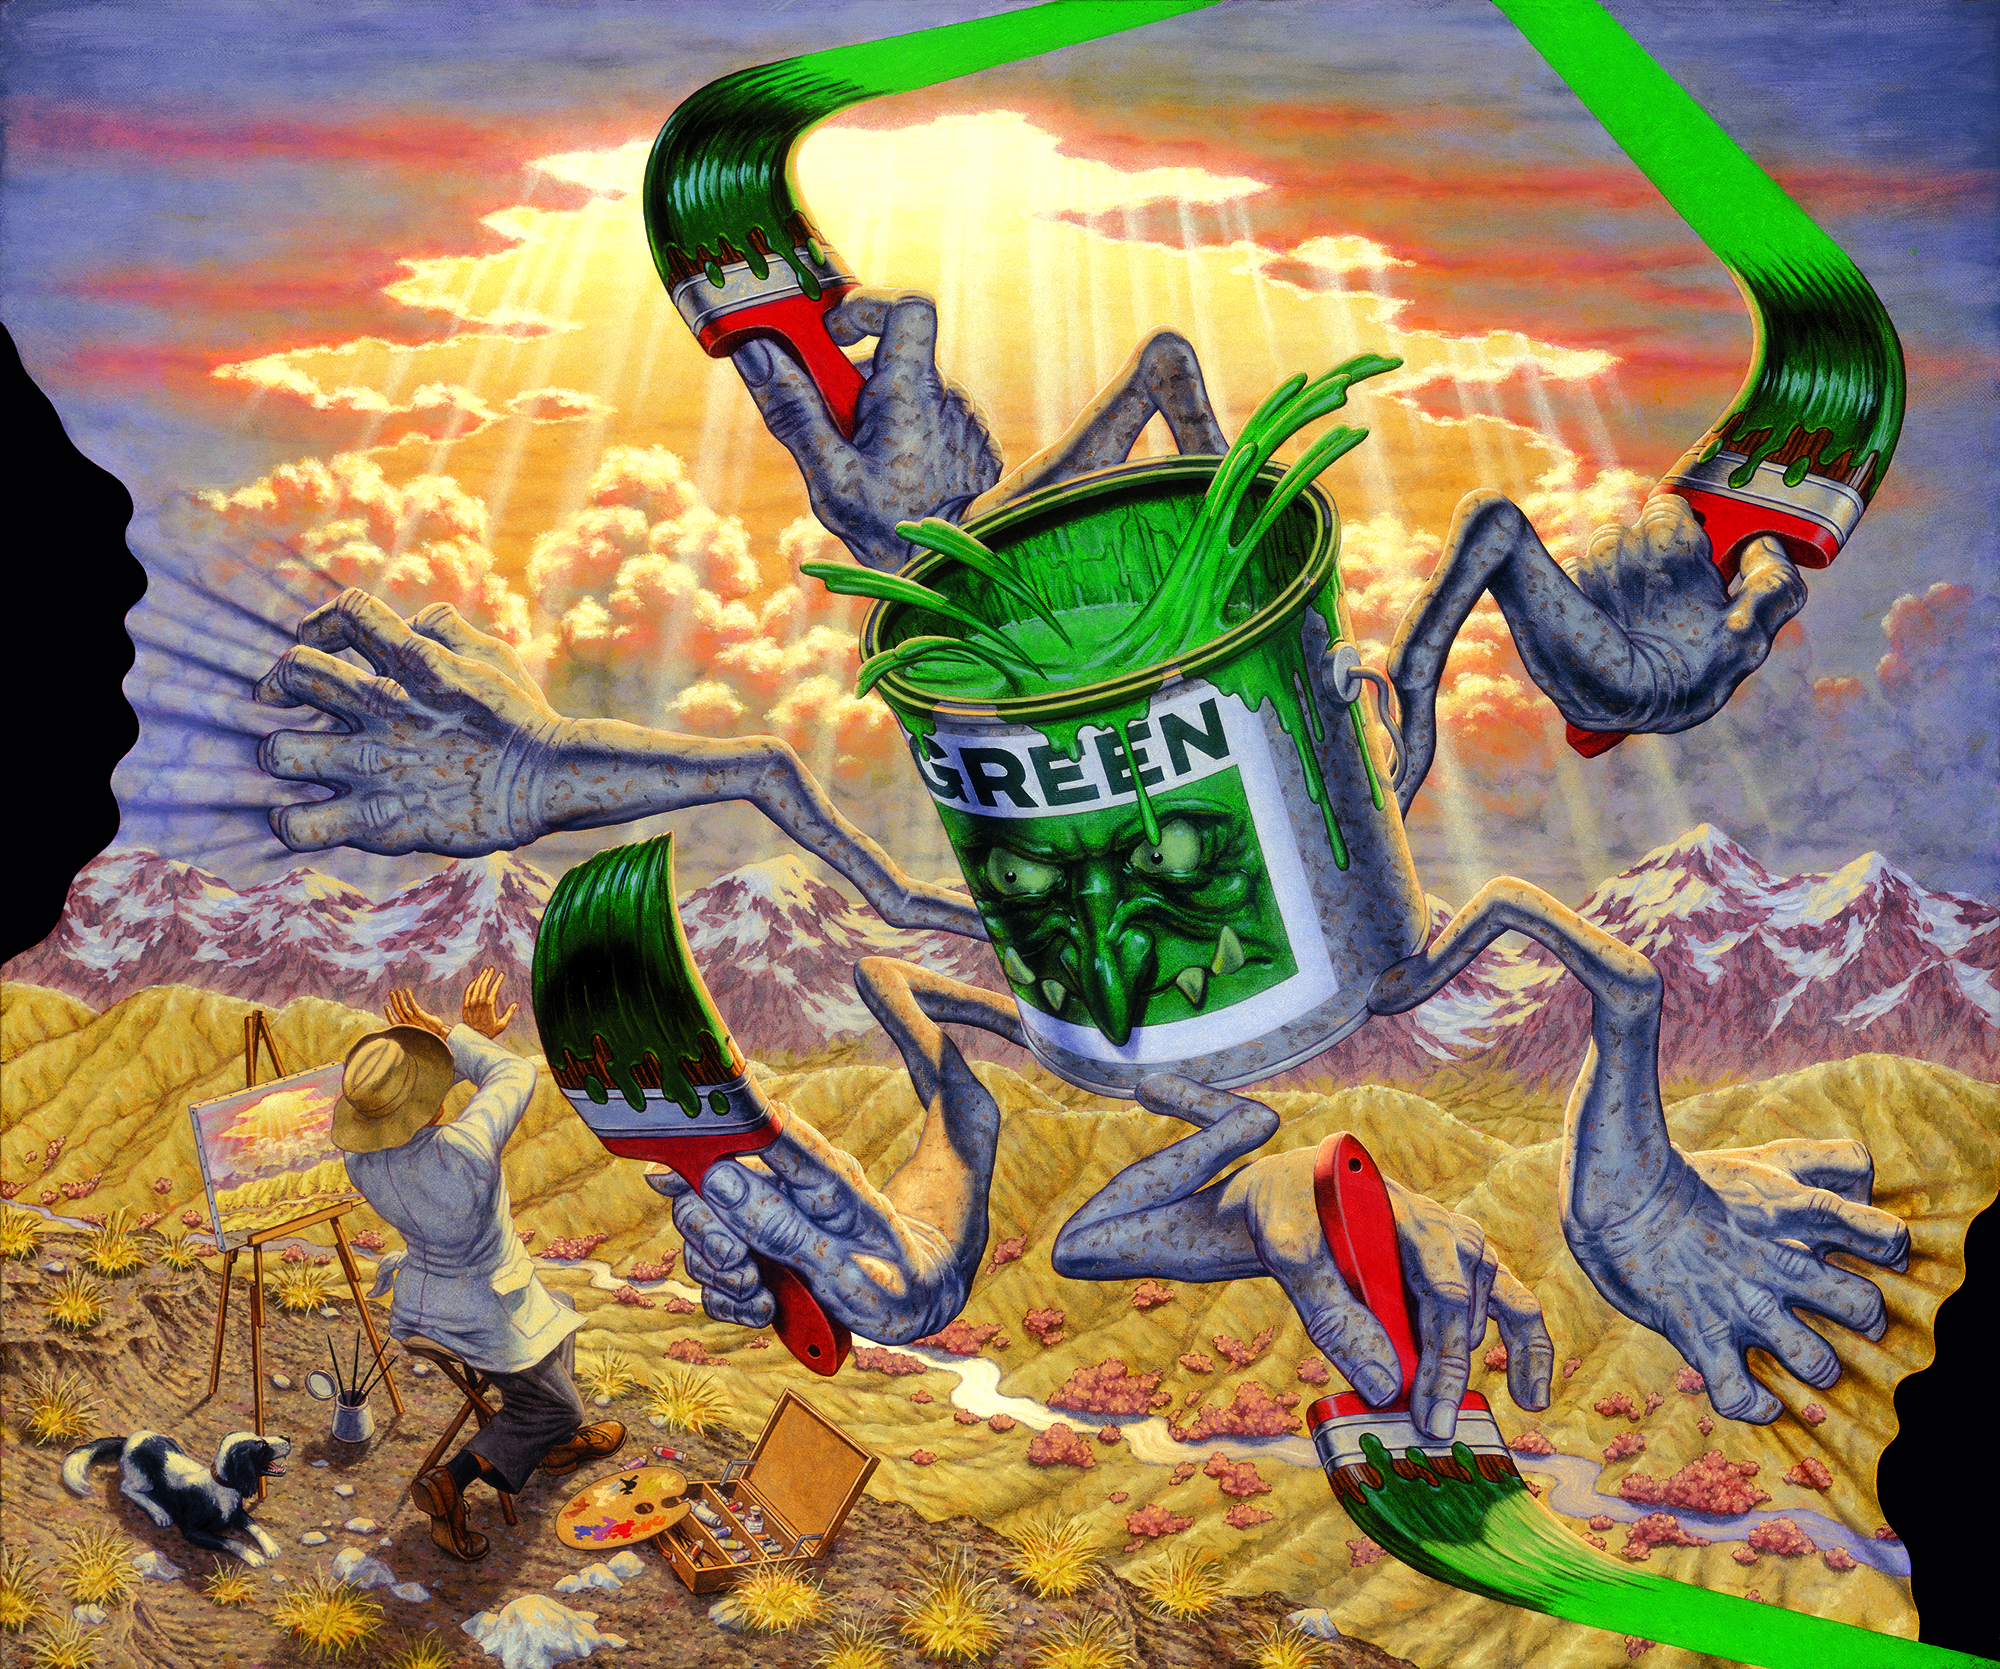 Robert Williams, The Fear of Green, 2001, Los Angeles County Museum of Art, gift of Ed and Danna Ruscha, © Robert Williams, photo courtesy of the artist